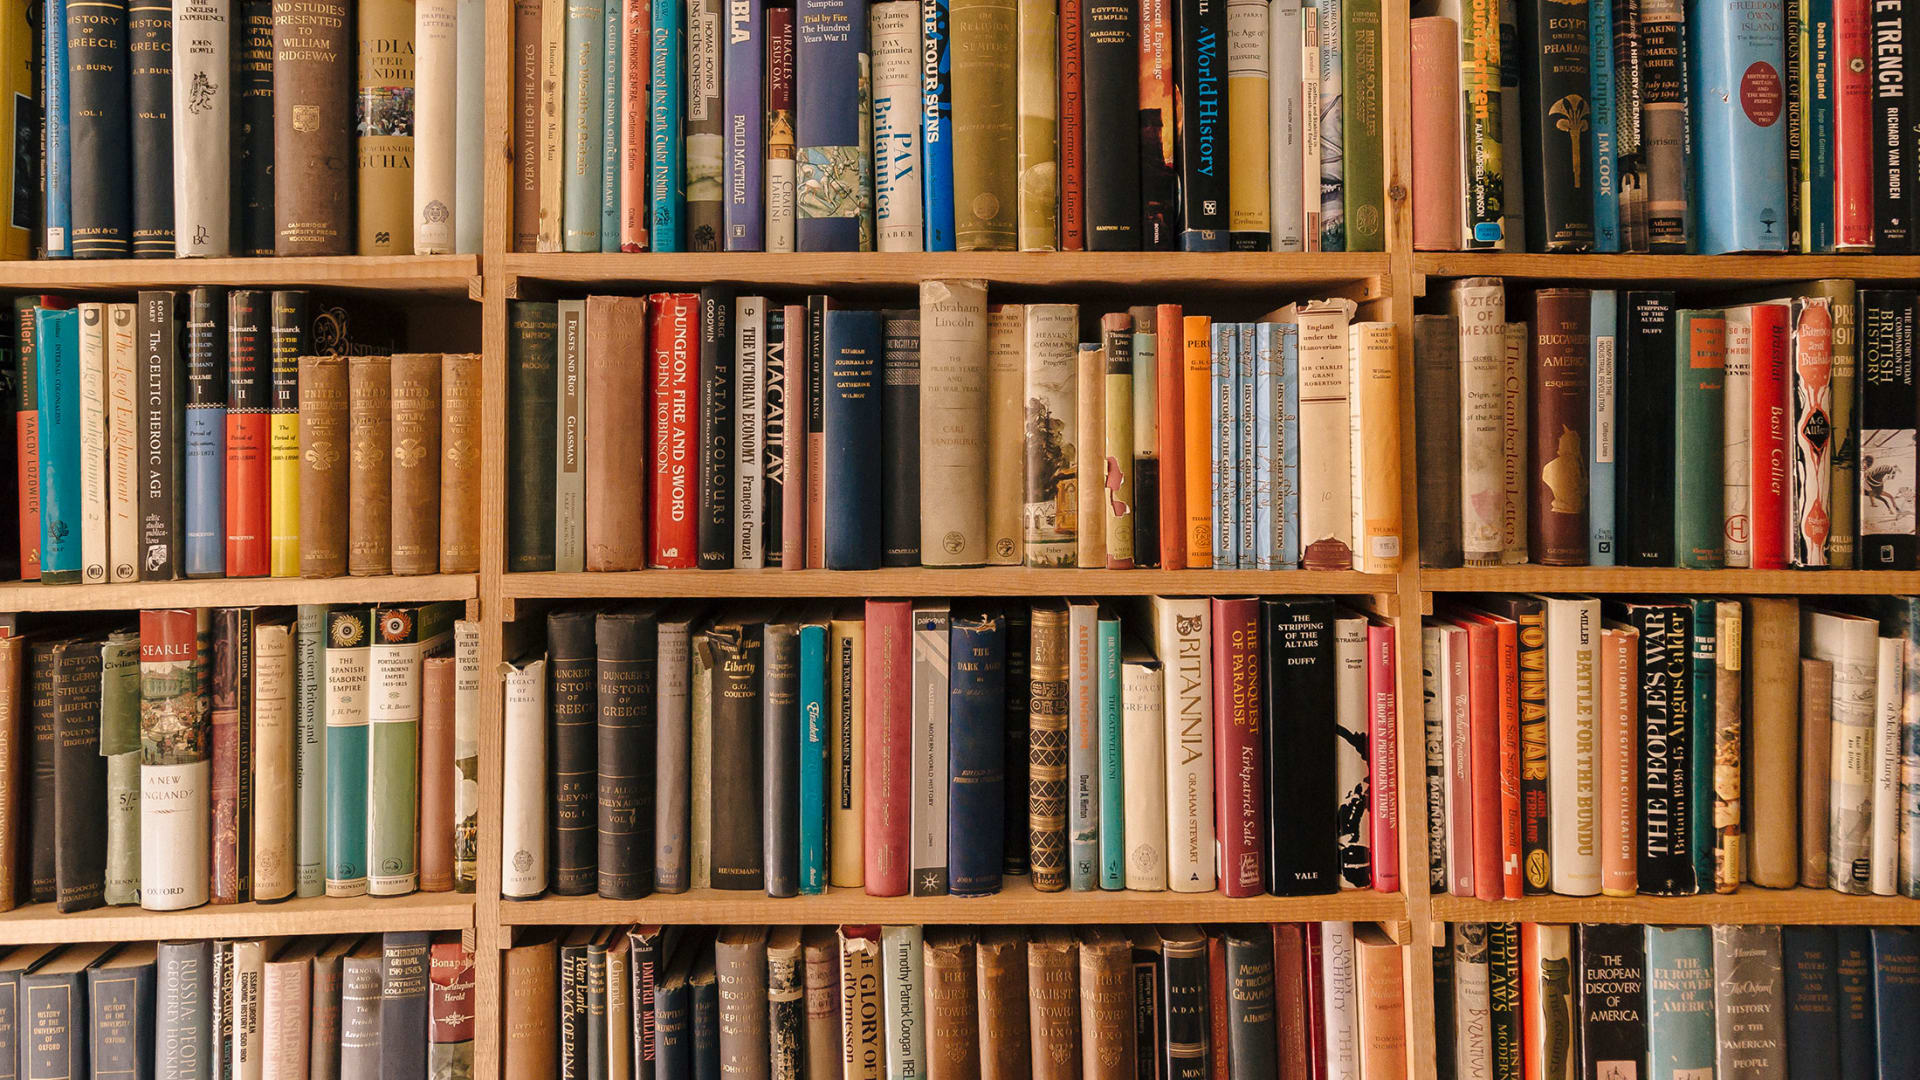 A Super-Reader Who Gets Through Hundreds of Books a Year Explains How to Read Way More